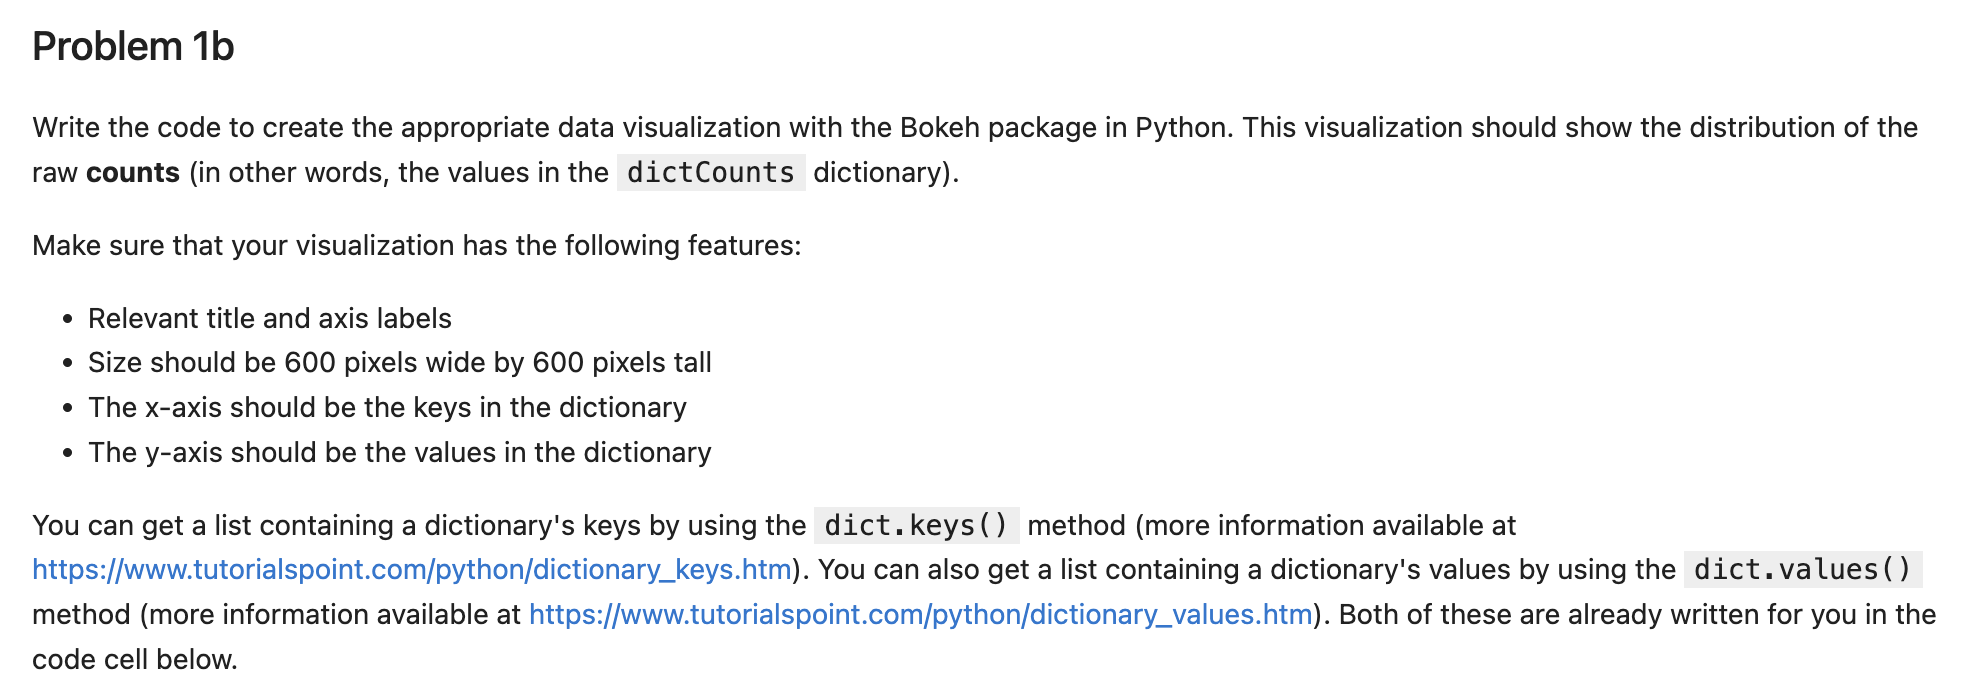 Problem 1b Write the code to create the appropriate data visualization with the Bokeh package in Python. This